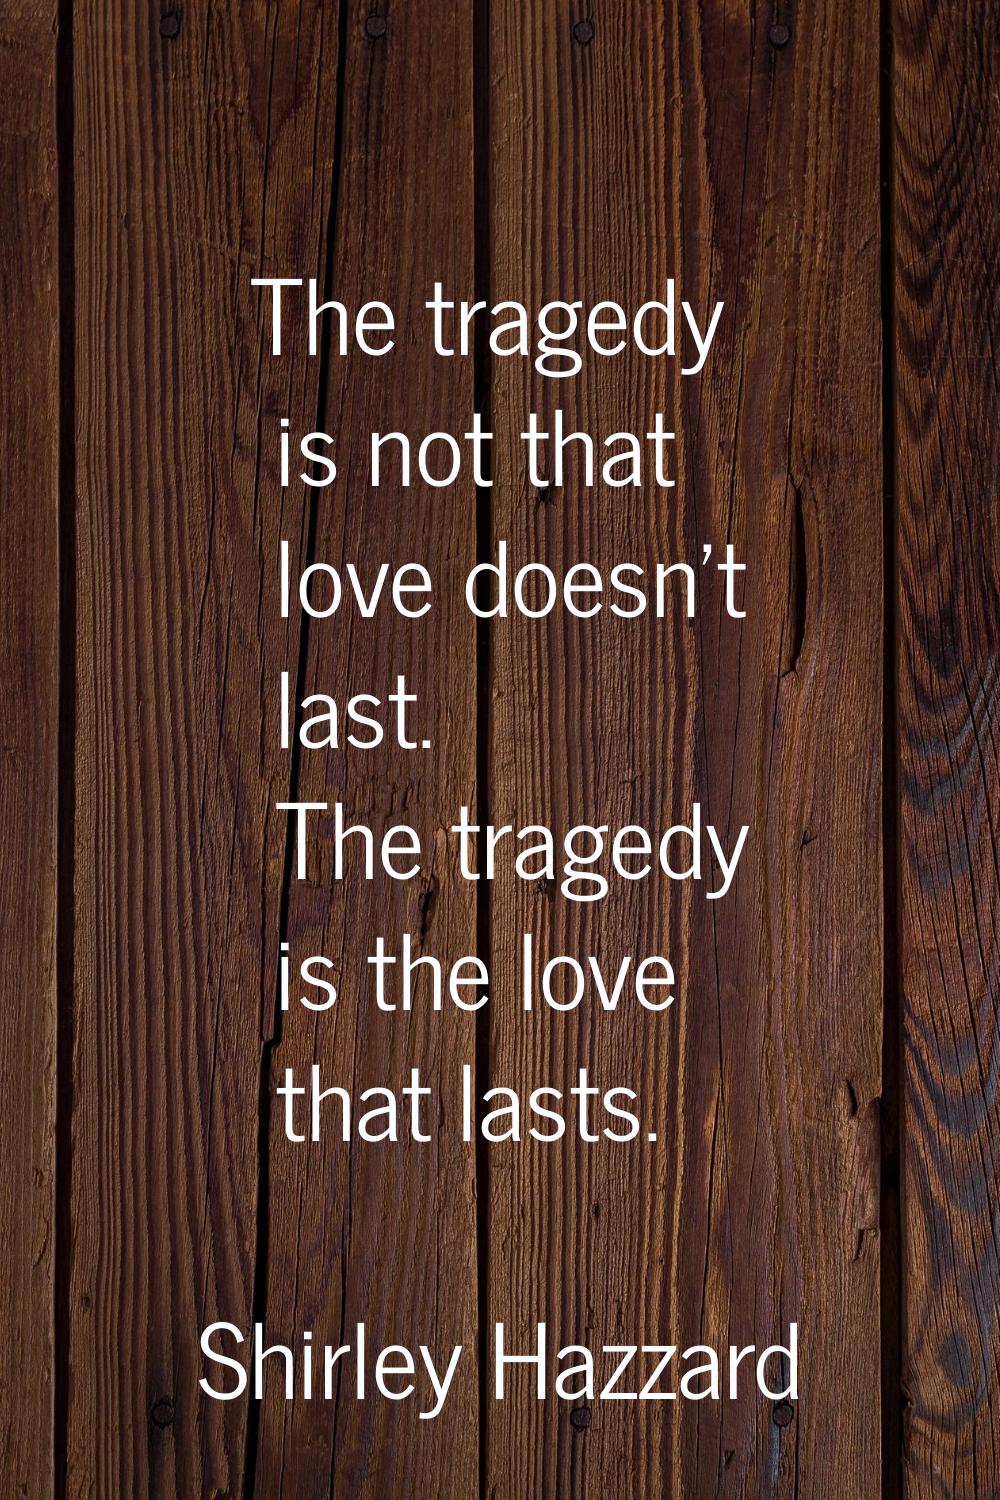 The tragedy is not that love doesn't last. The tragedy is the love that lasts.